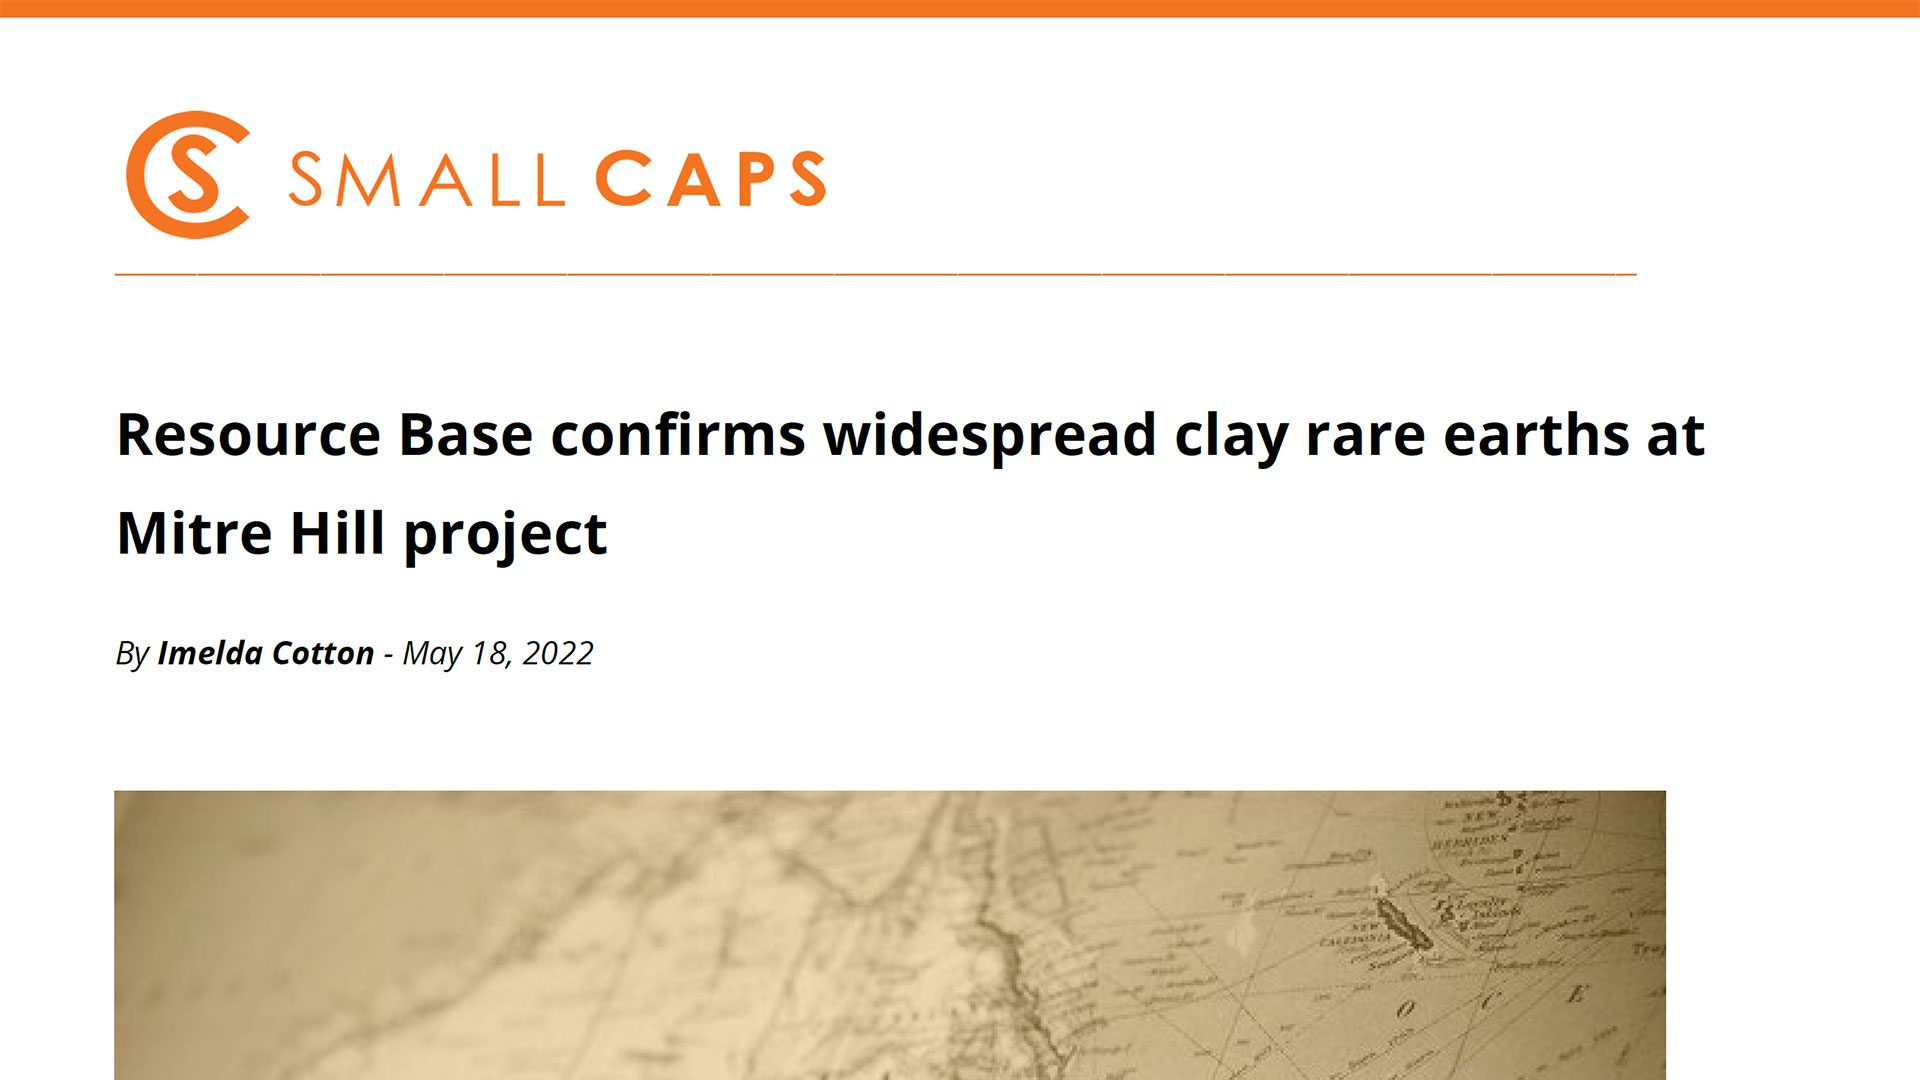 Small Caps: Resource Base confirms widespread clay rare earths at Mitre Hill project